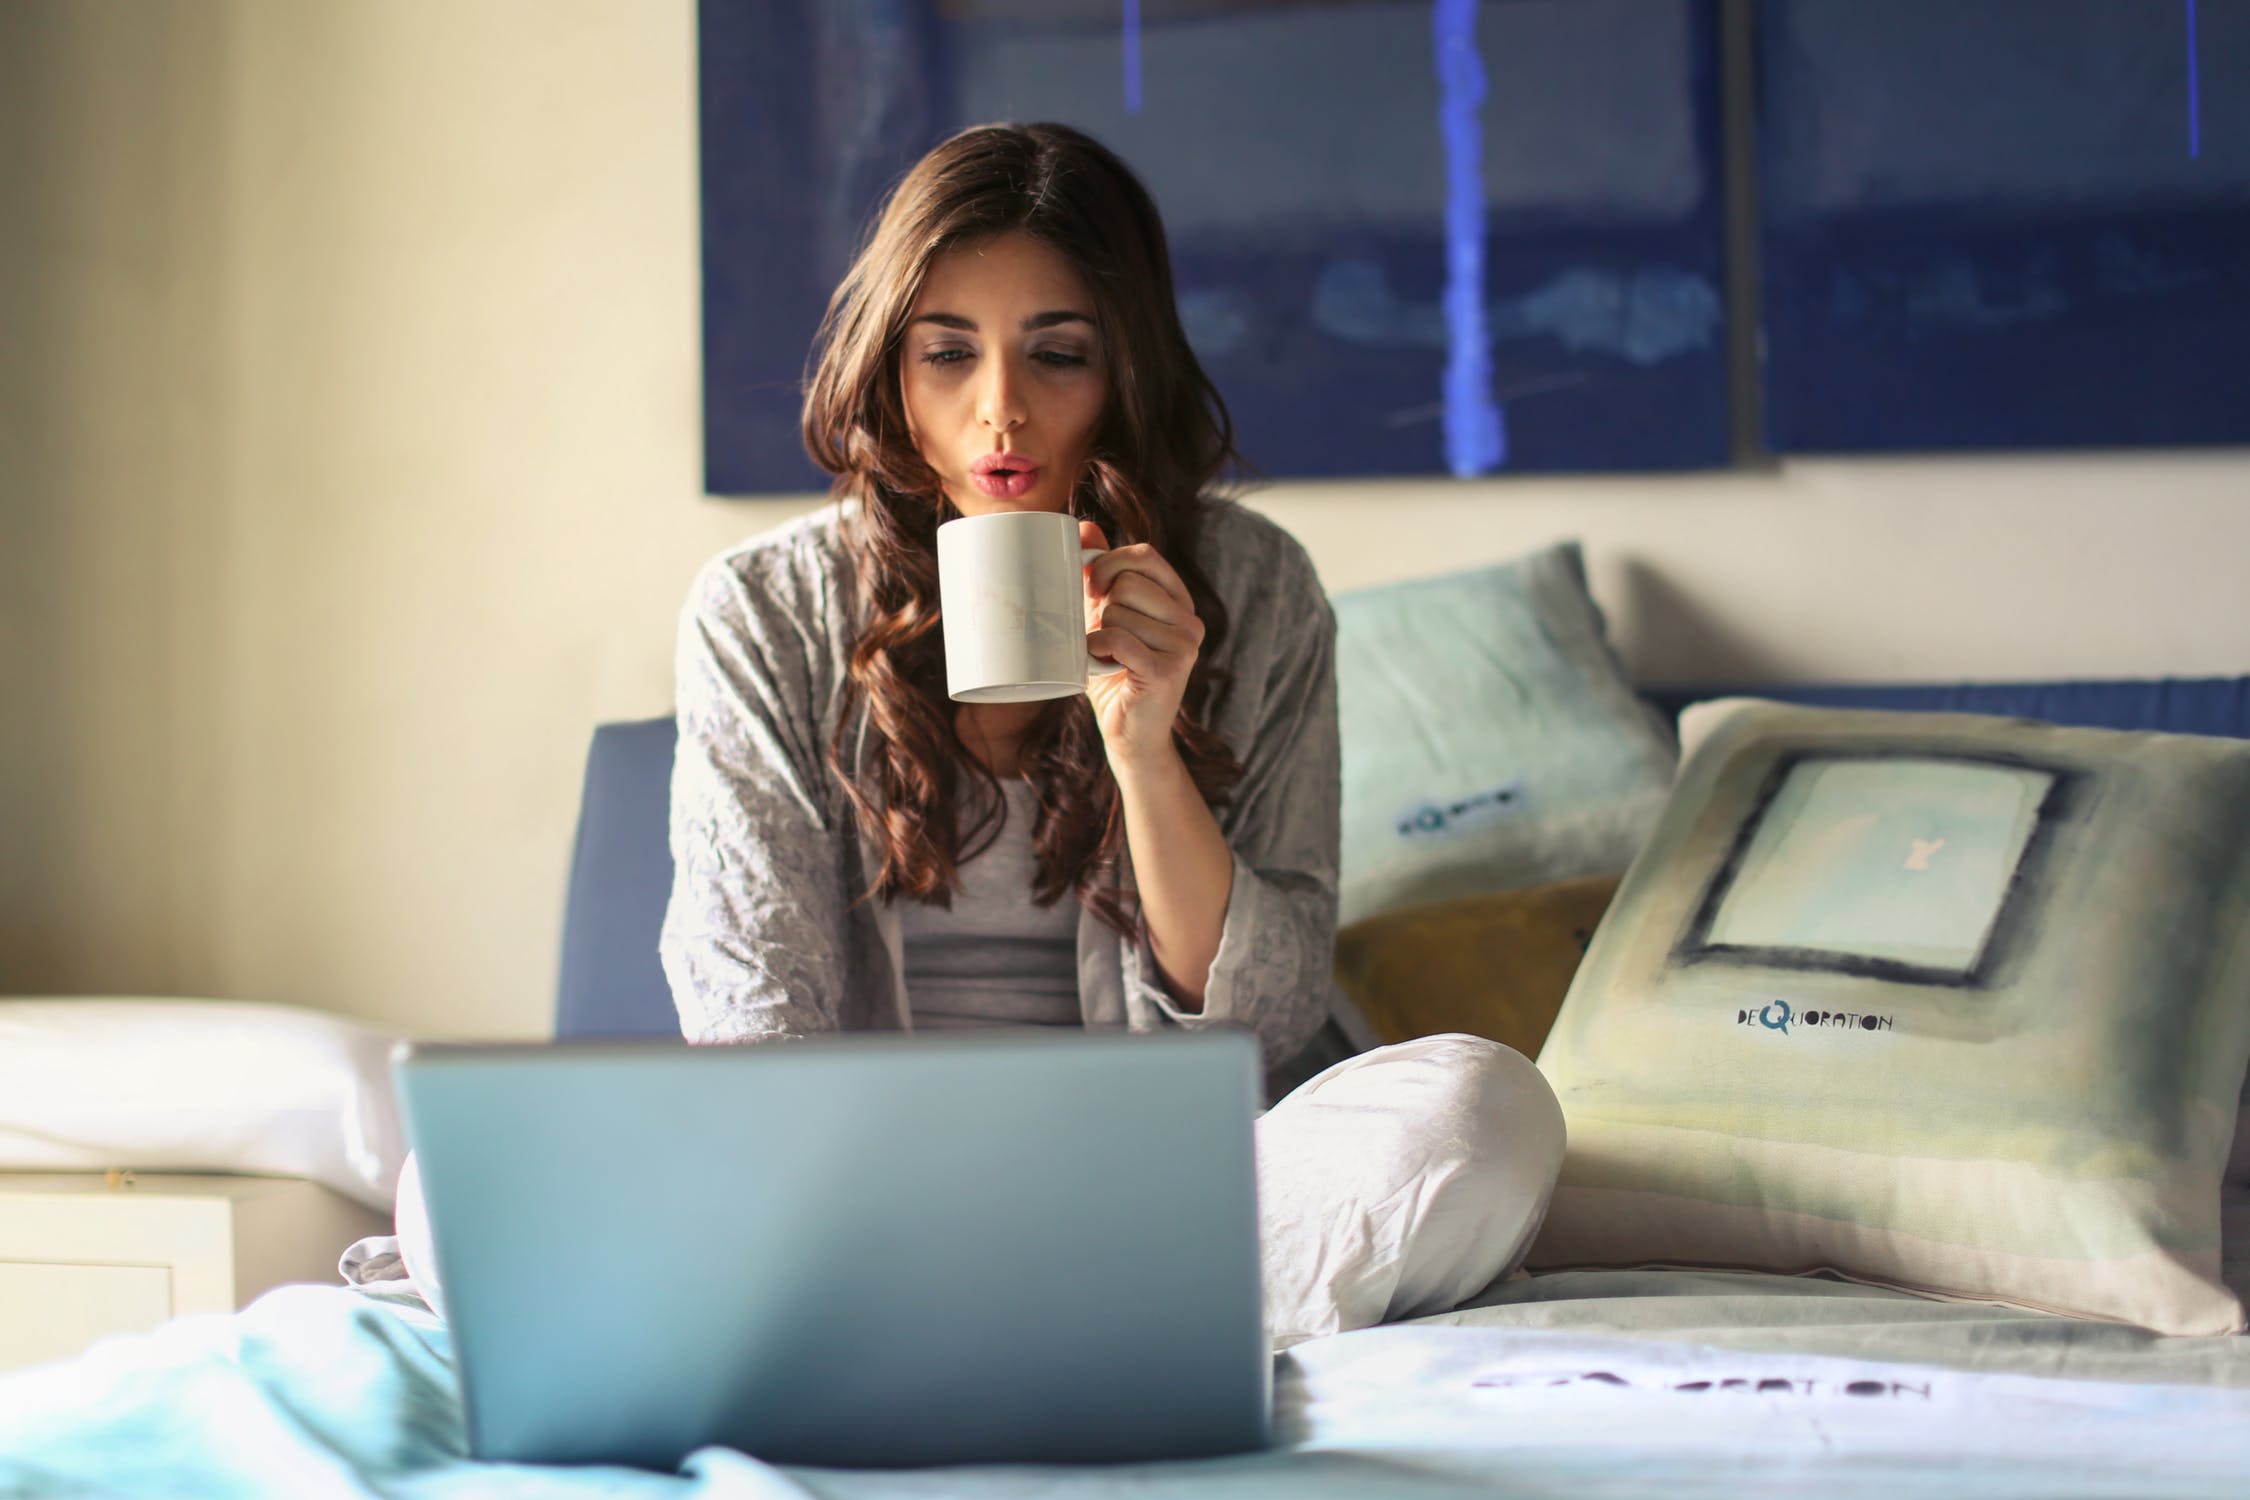 10 tips to work from home efficiently